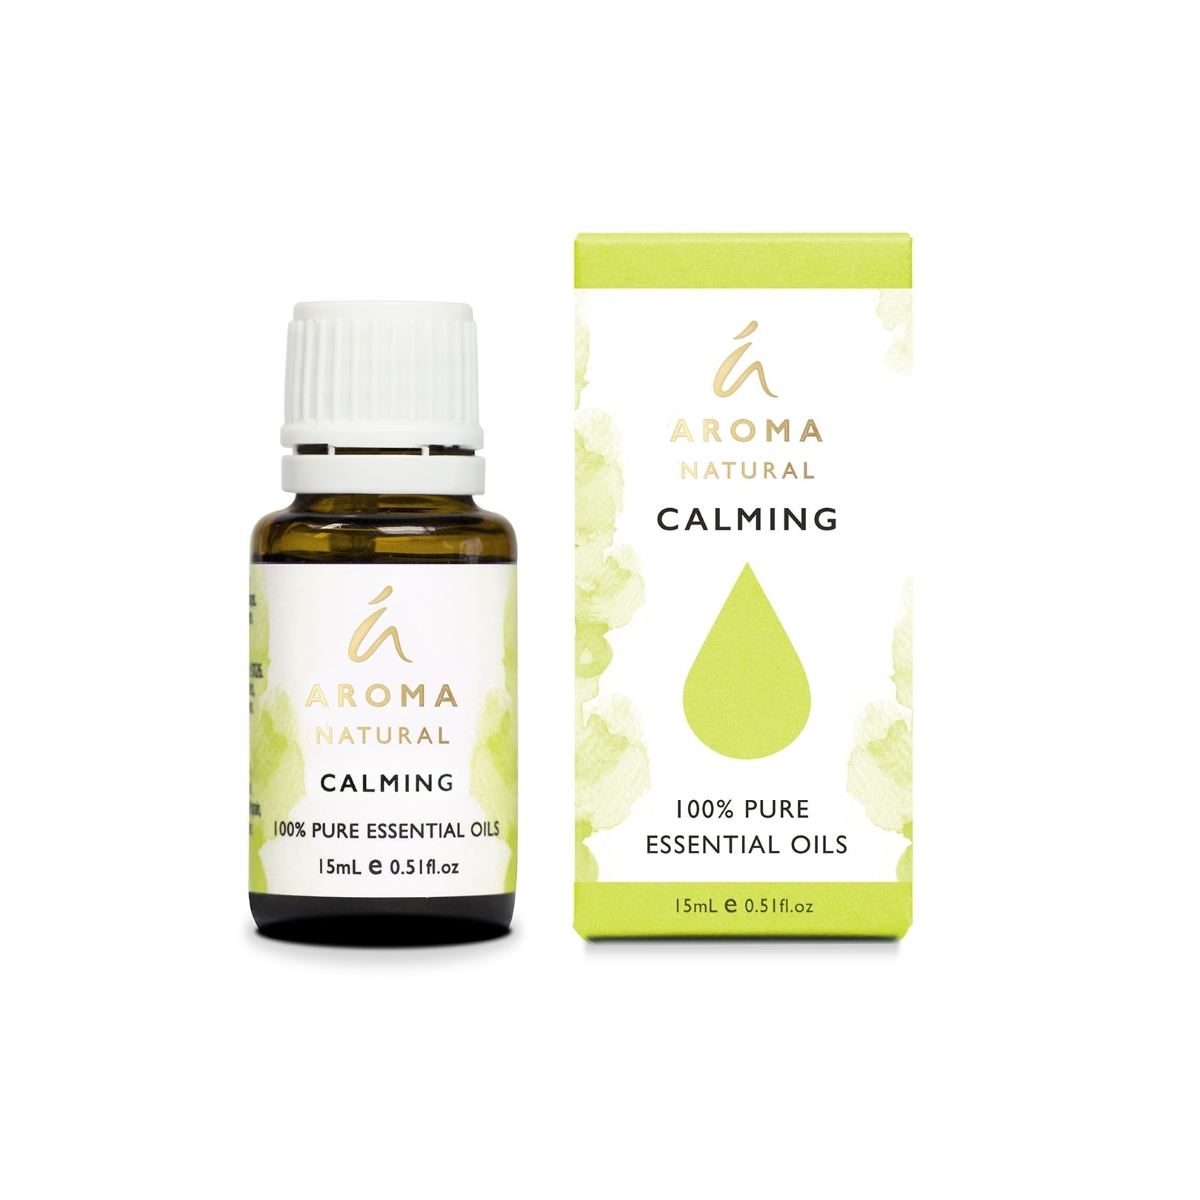 Aroma Natural Calming Essential Oil Blend 15mL